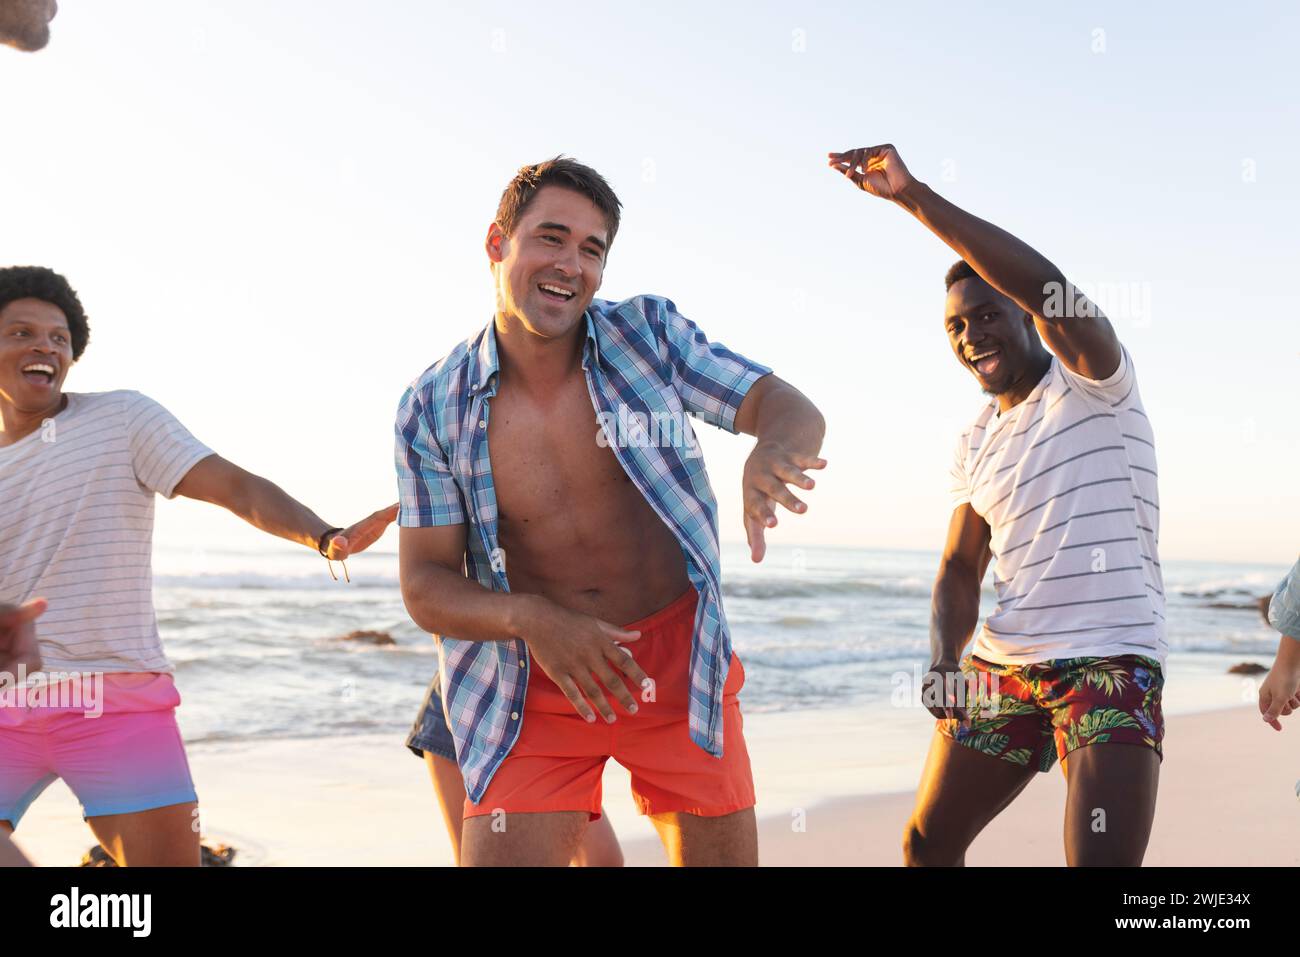 Young men enjoy a lively moment on the beach Stock Photo